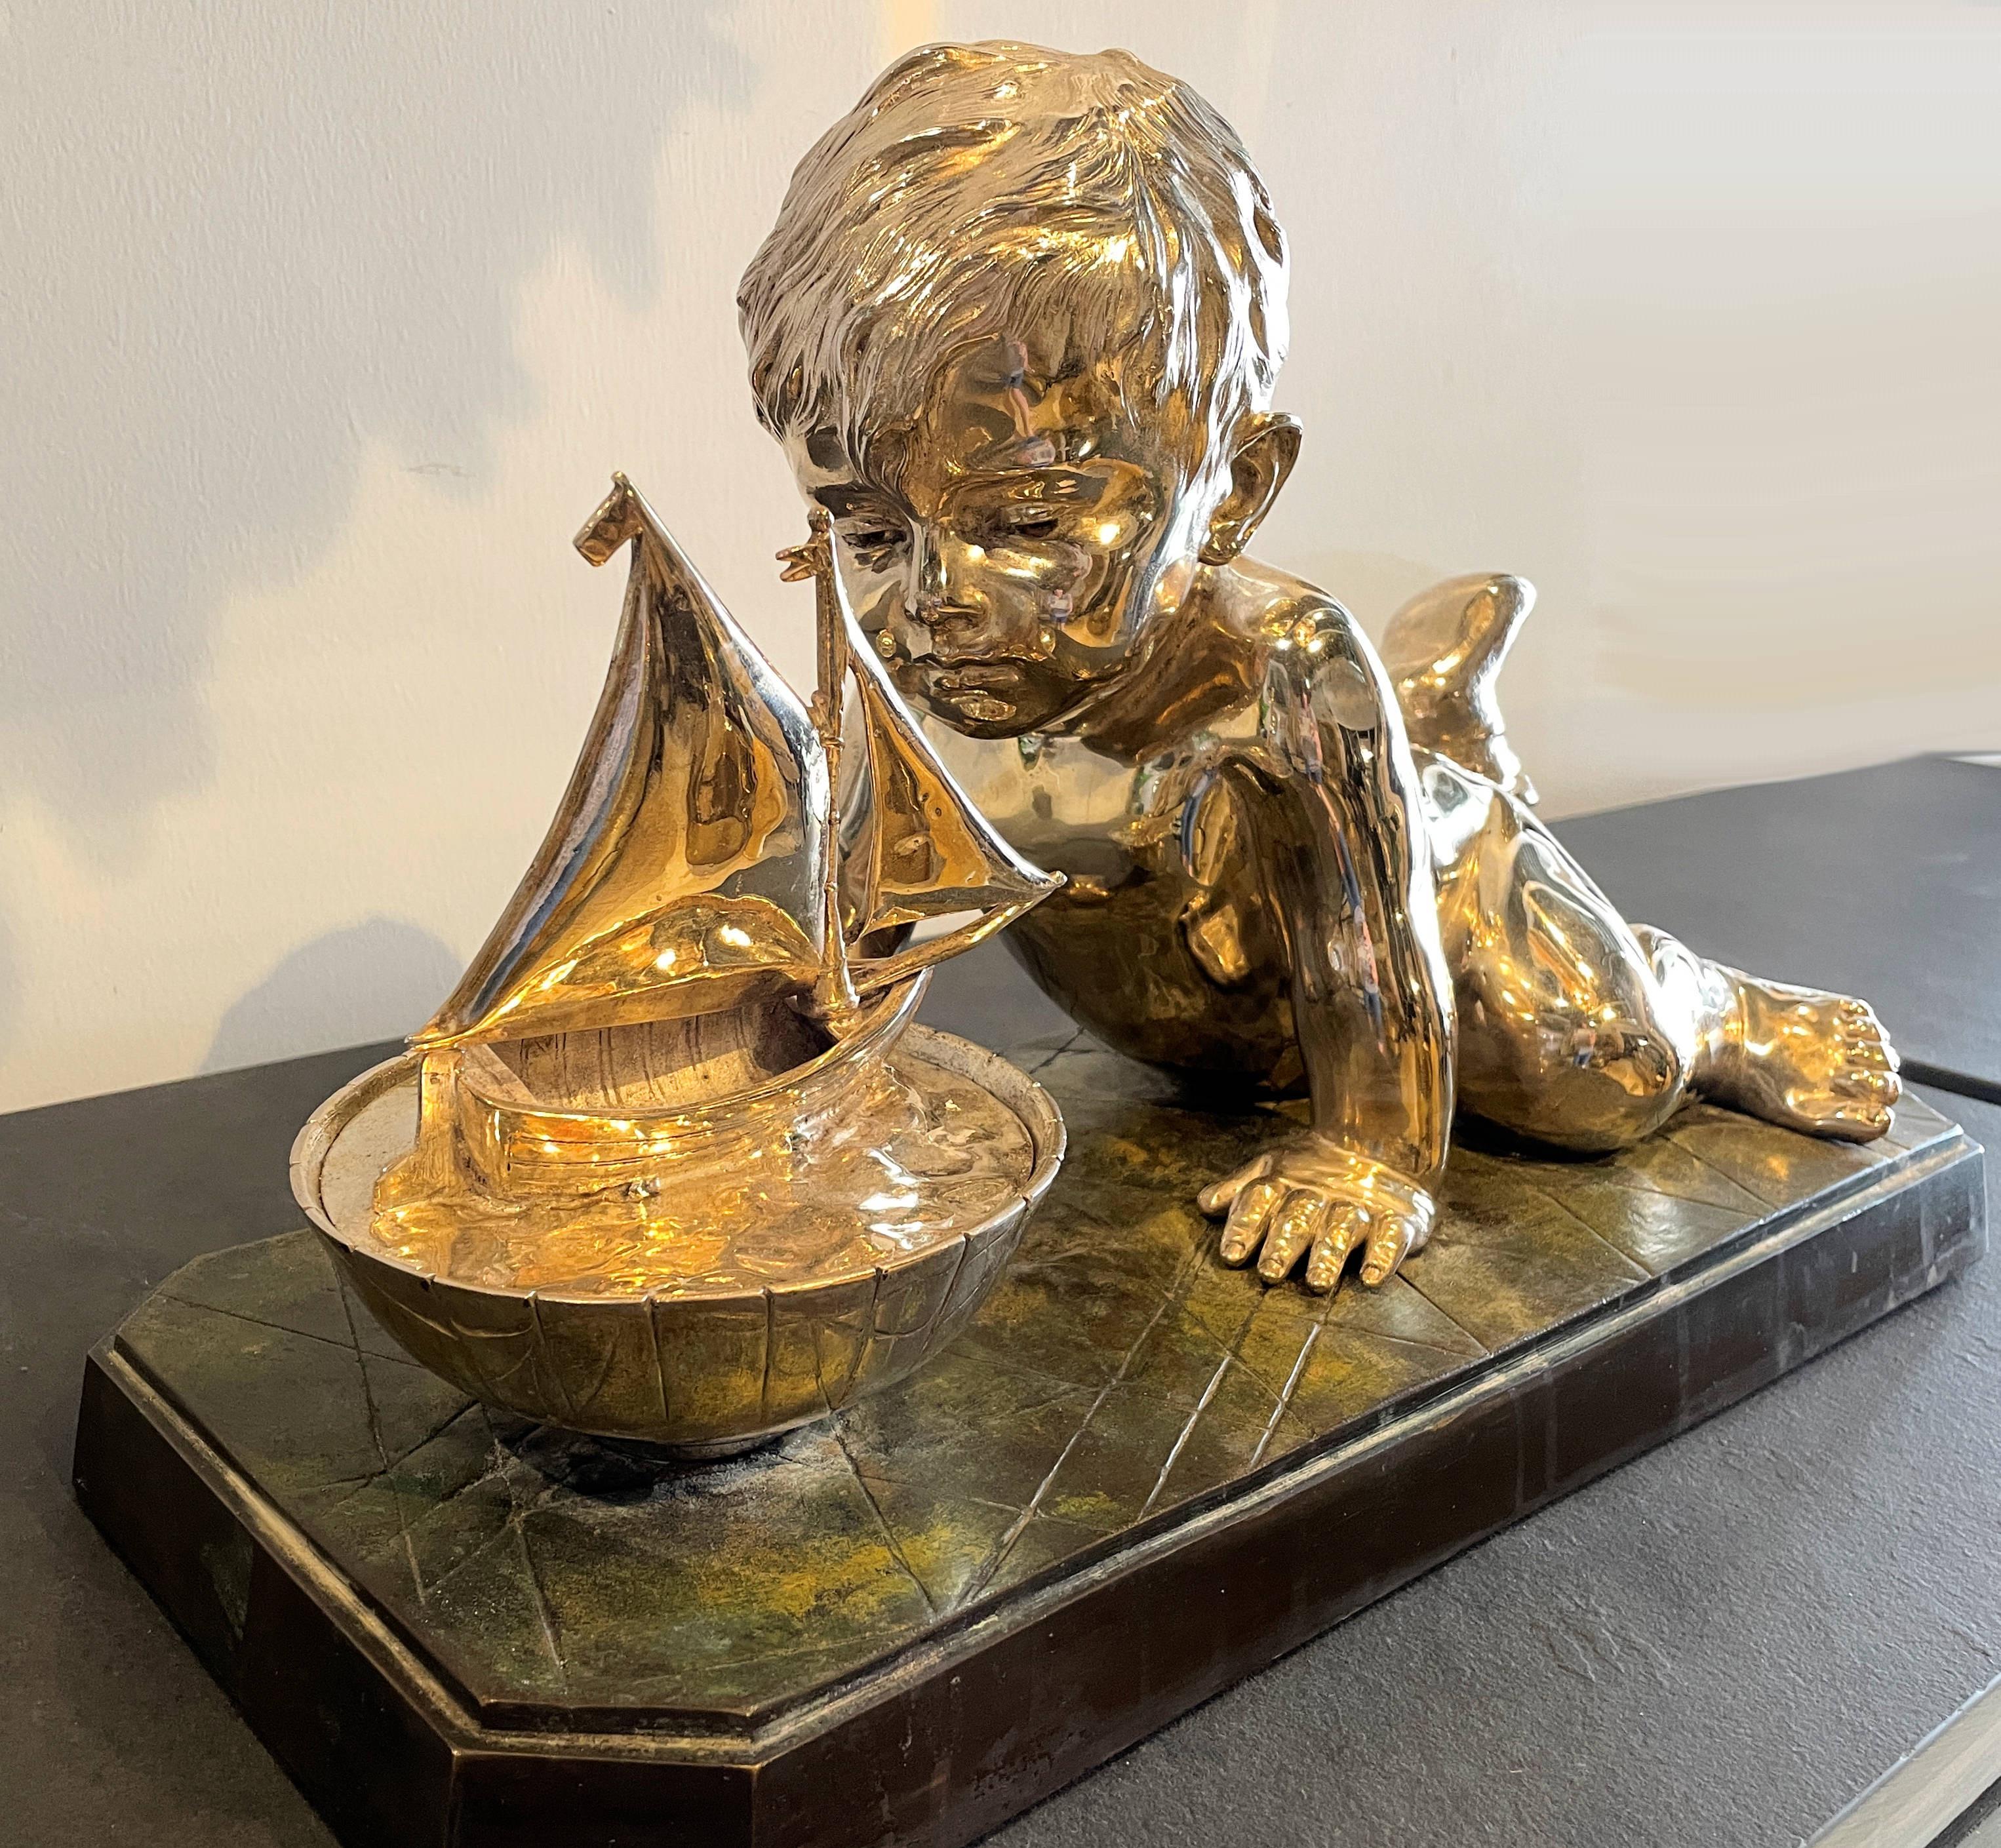 Silvered bronze on marble of a young child playing with a toy boat, signed Villanis, Emmanuel Villanis, 1858-1914, France.